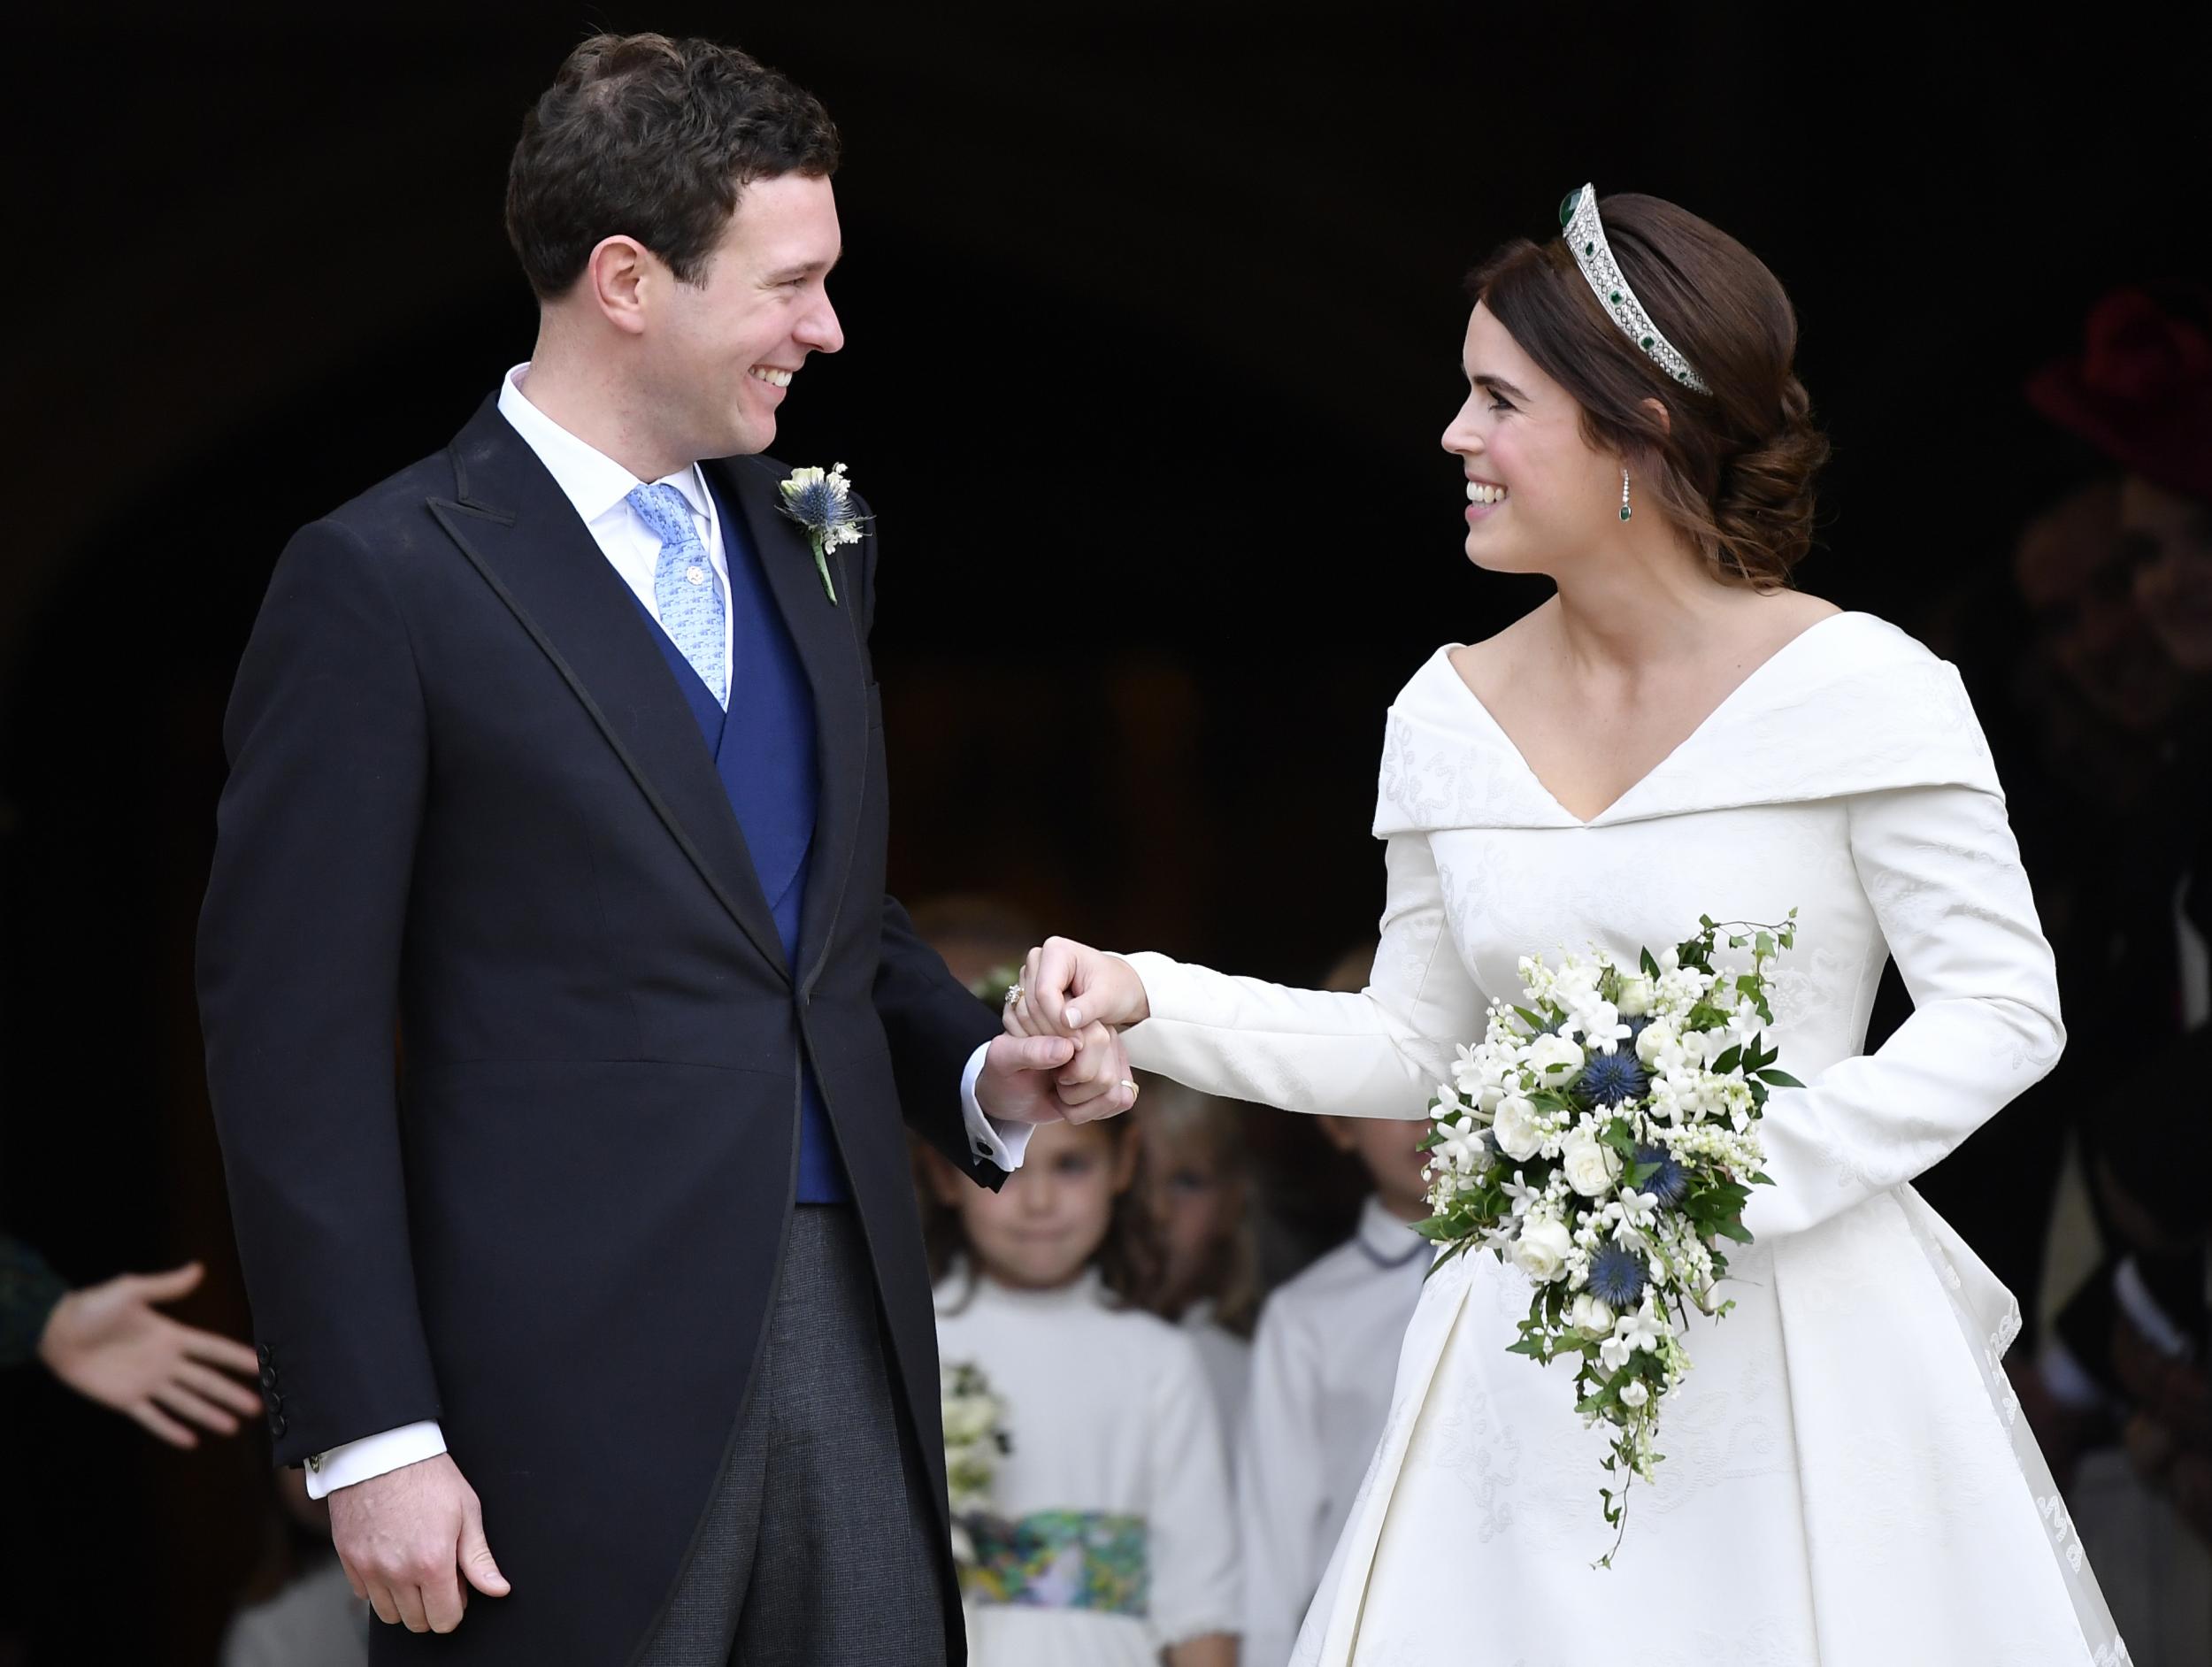 Princess Eugenie Releases Unseen Photo From Royal Wedding The Independent The Independent